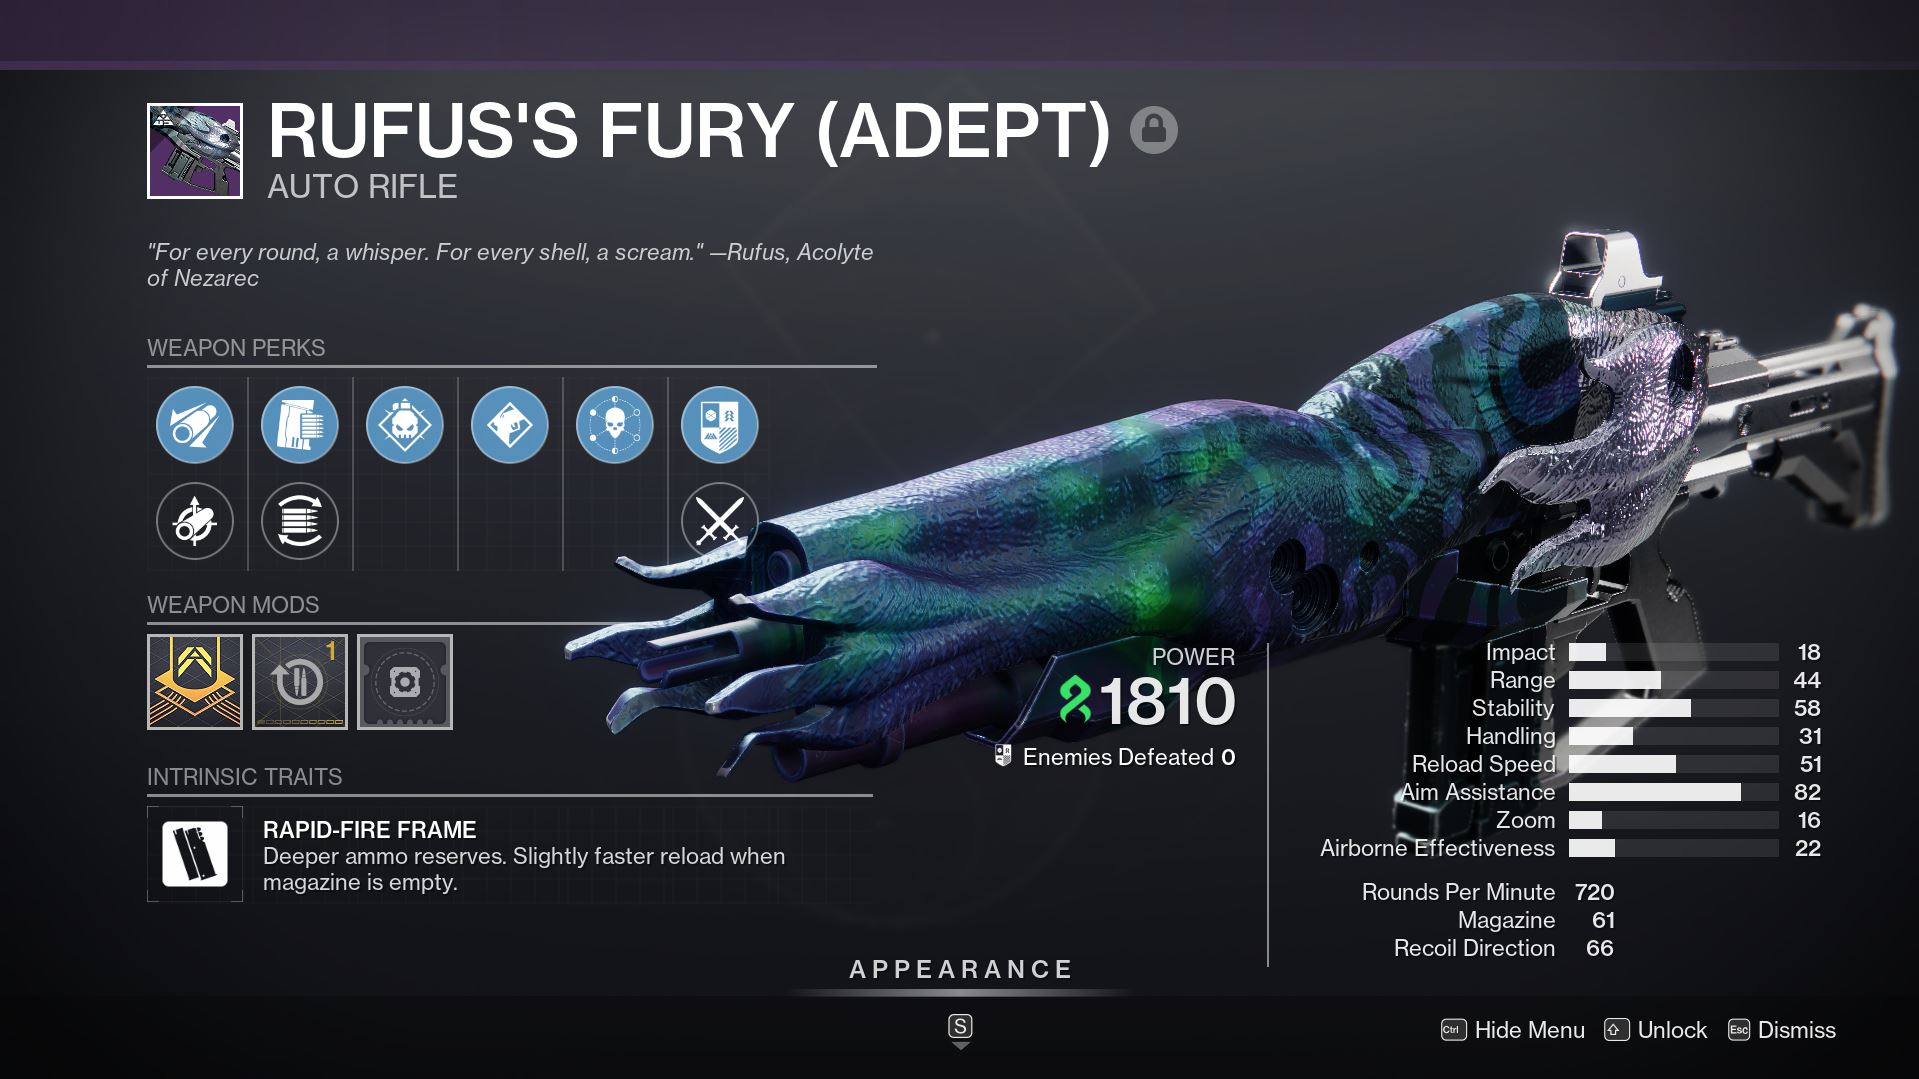 How To Complete The Cosmic Equilibrium Challenge In Destiny 2 Root Of Nightmares Rufus's Fury Adept Auto Rifle